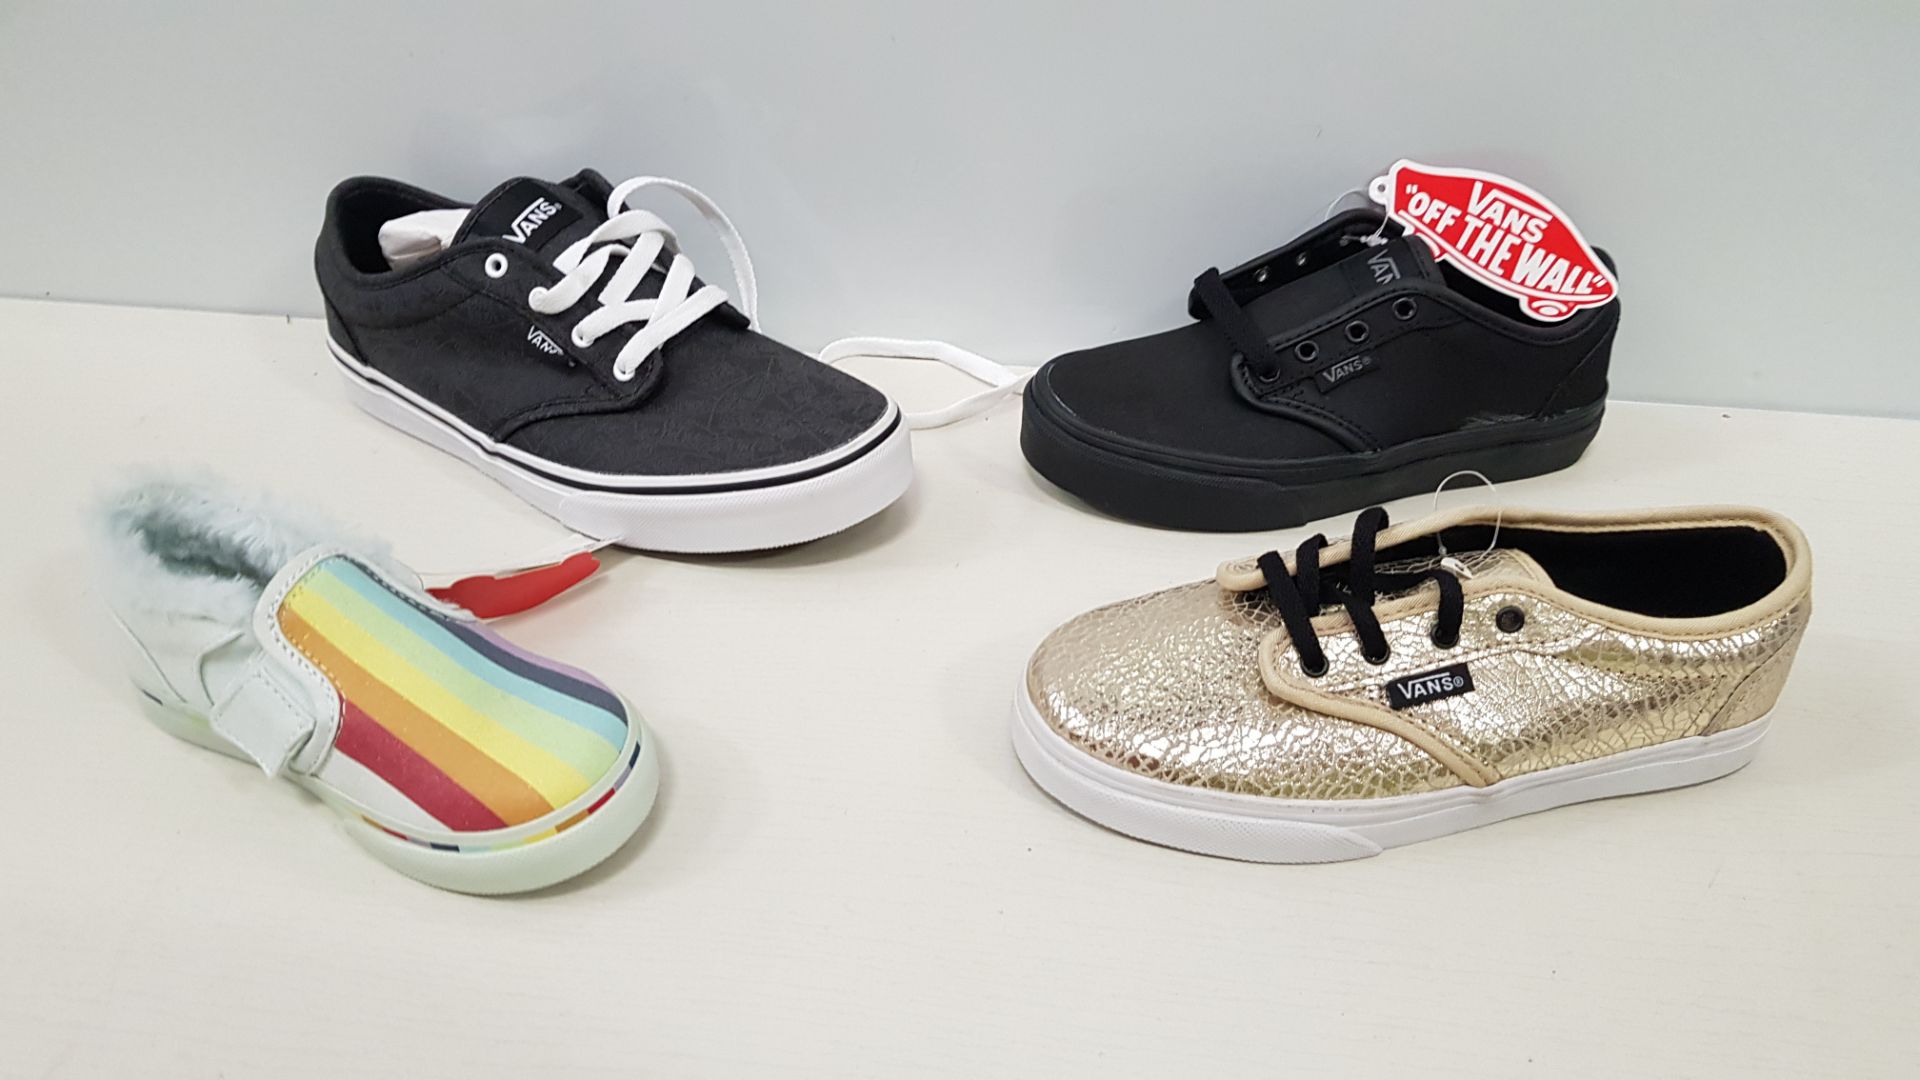 7X BRAND NEW MIXED VANS OFF THE WALL SHOE LOT CONTAINING RAINBOW COLOURED, GOLD COLOURED, WHITE